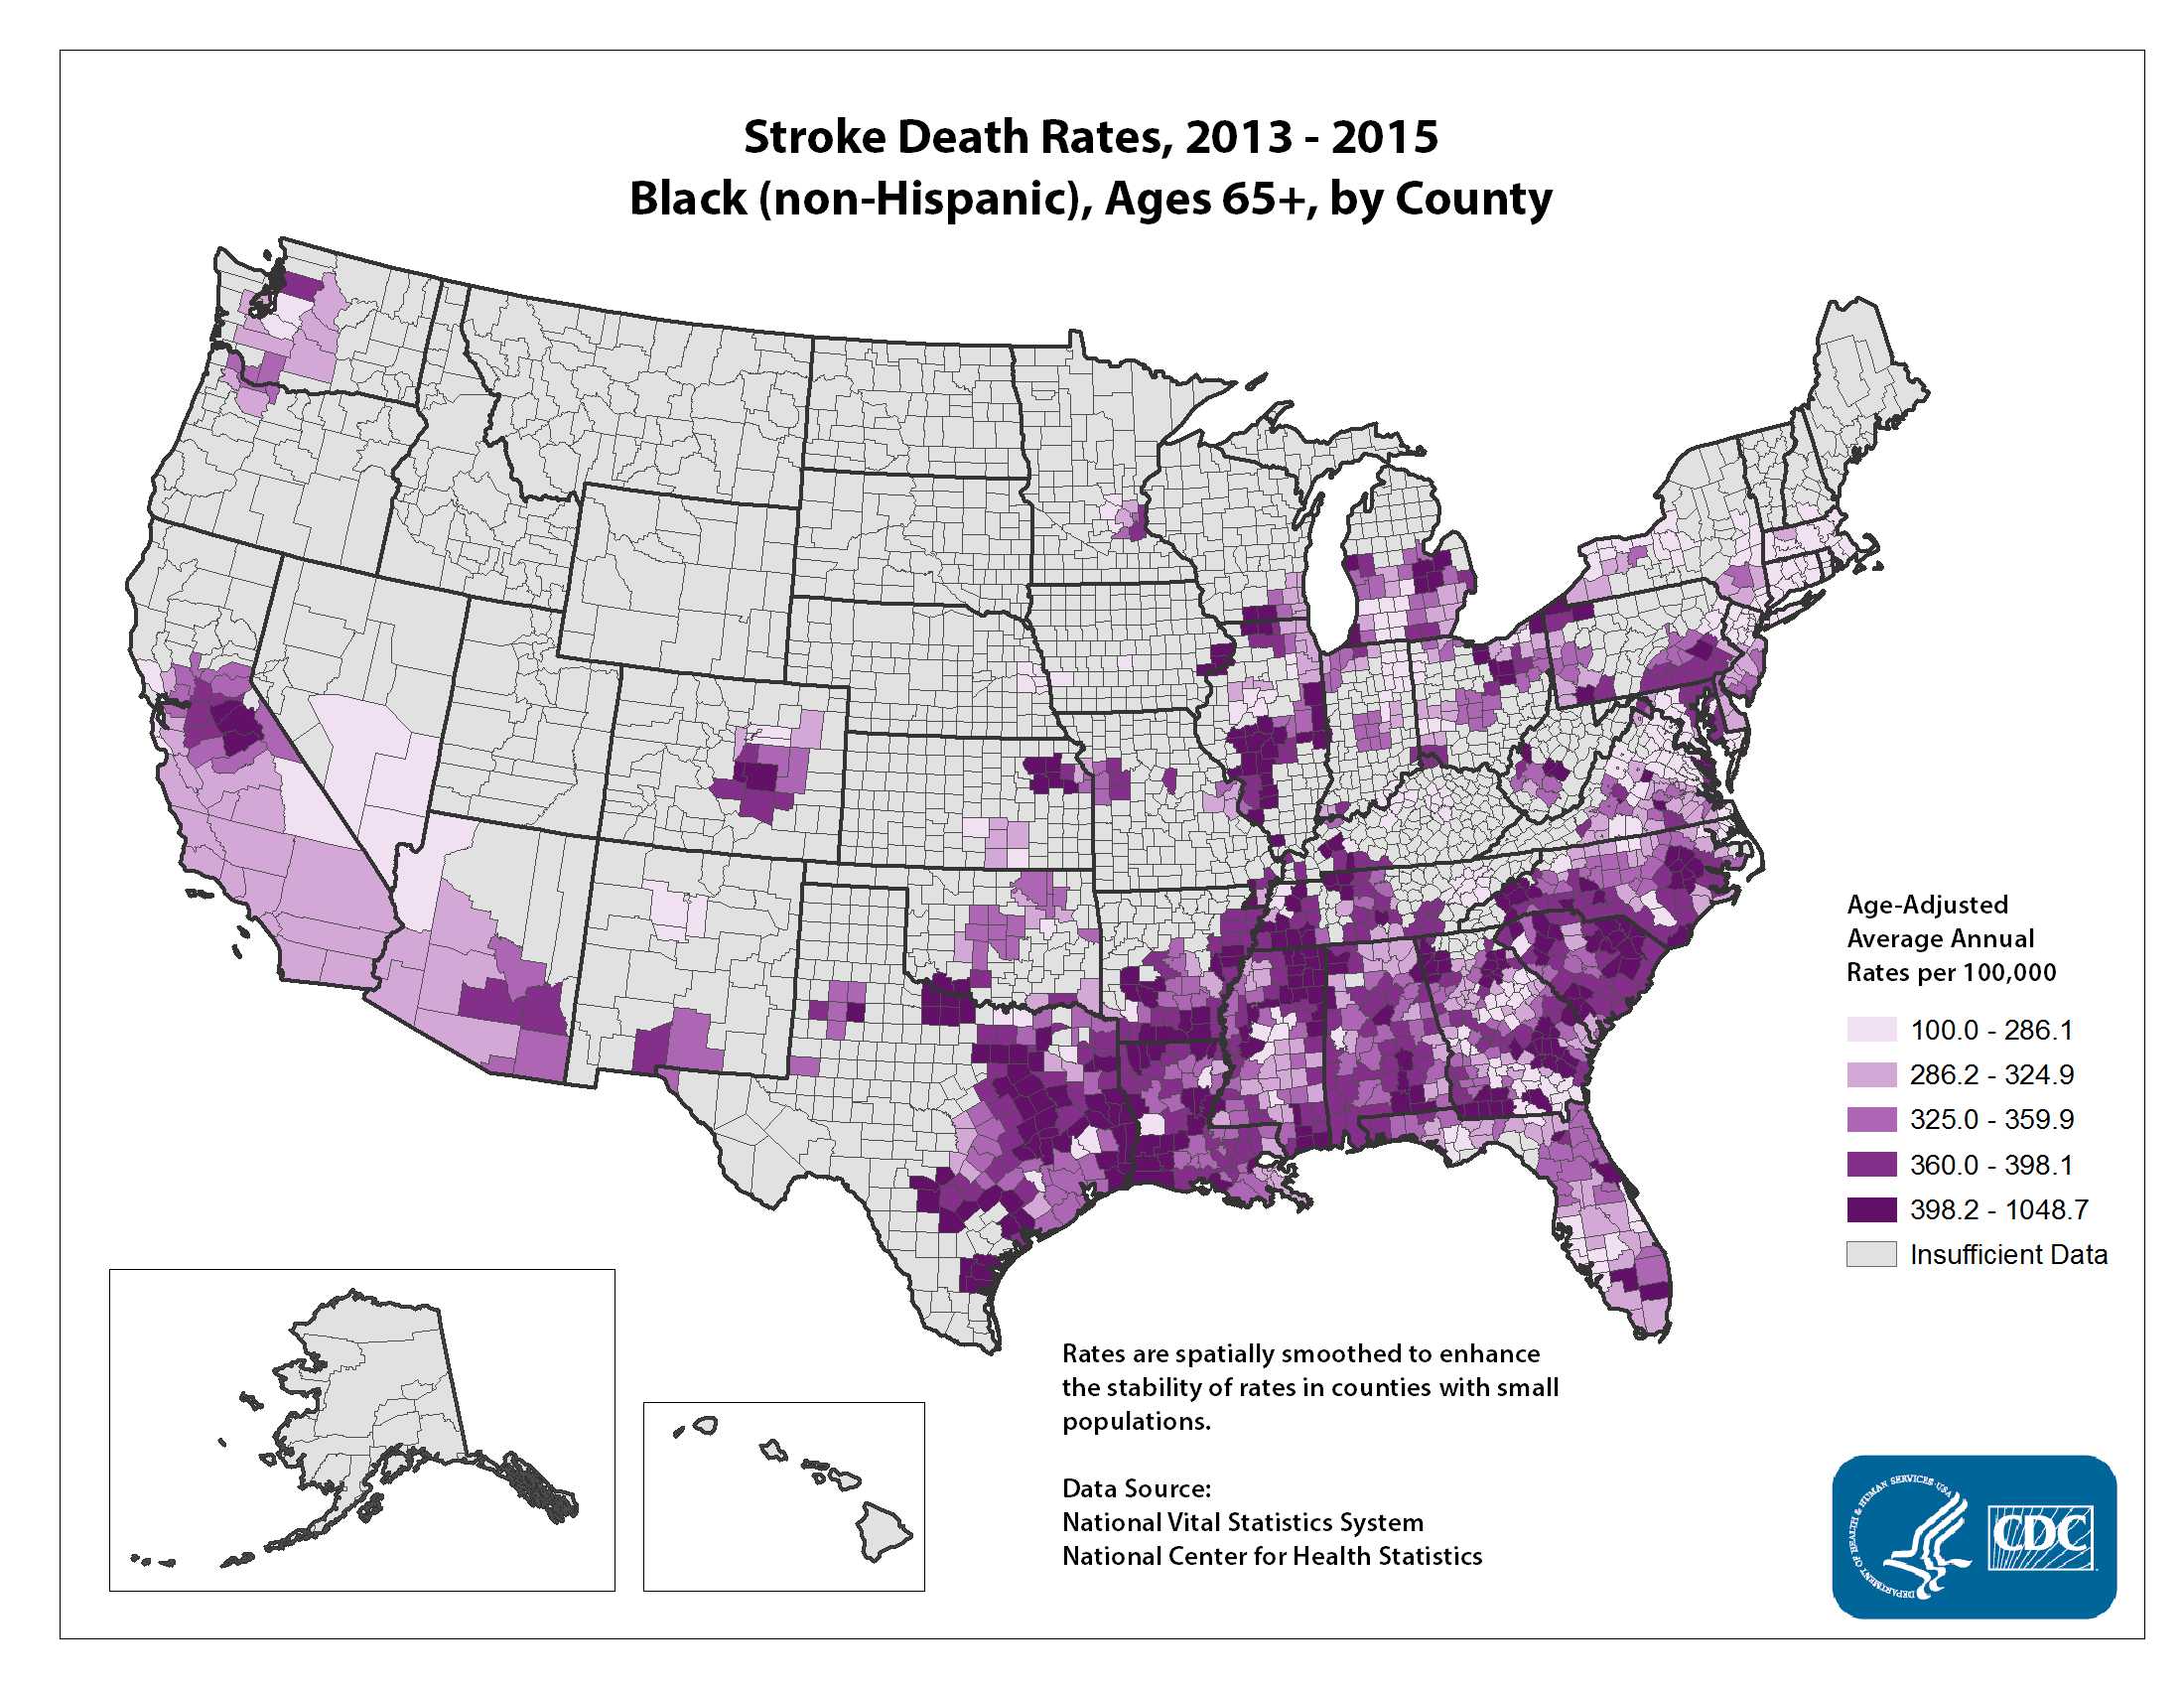 Stroke Death Rates for 2012 through 2014 for Blacks Aged 65 Years and Older by County. The map shows that concentrations of counties with the highest stroke death rates - meaning the top quintile - are located primarily in parts of the Southeast, Texas, Louisiana, and Arkansas. Pockets of high-rate counties also are found in Pennsylvania, North Carolina, South Carolina, Georgia, and Illinois.